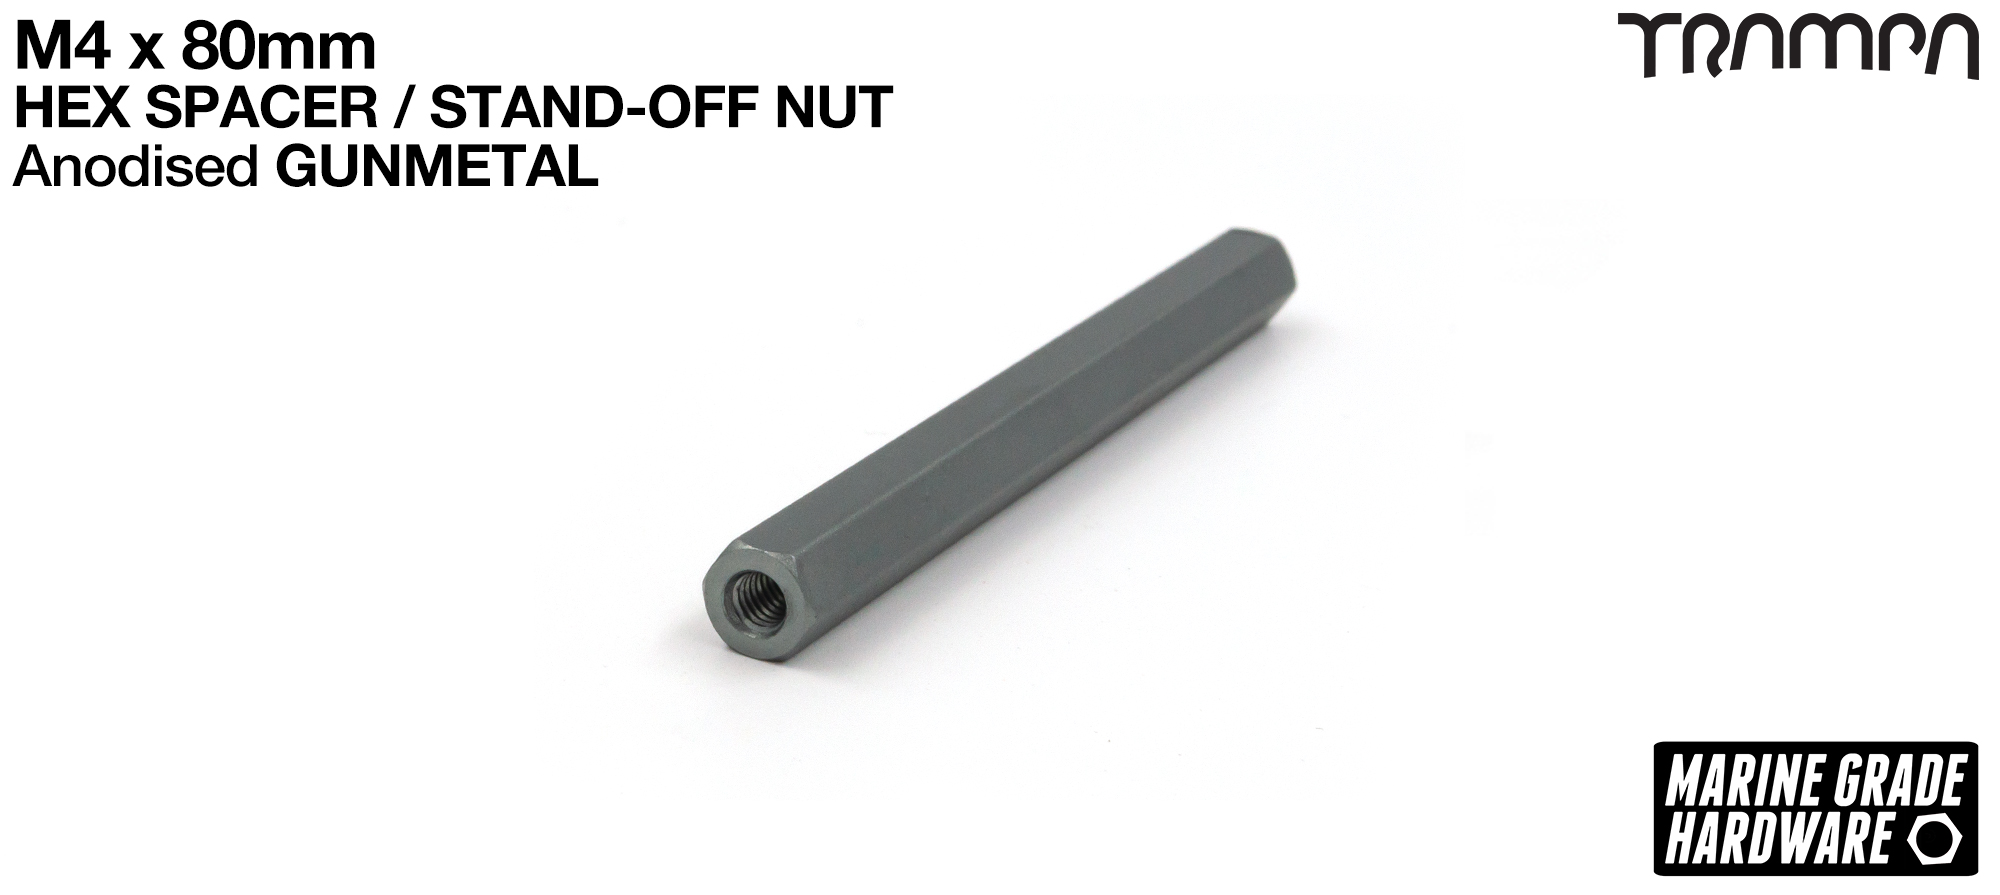 M4 x 80mm Aluminium Threaded Spacer Nut Used for assembling the BEAST Battery Boxes - GUNMETAL